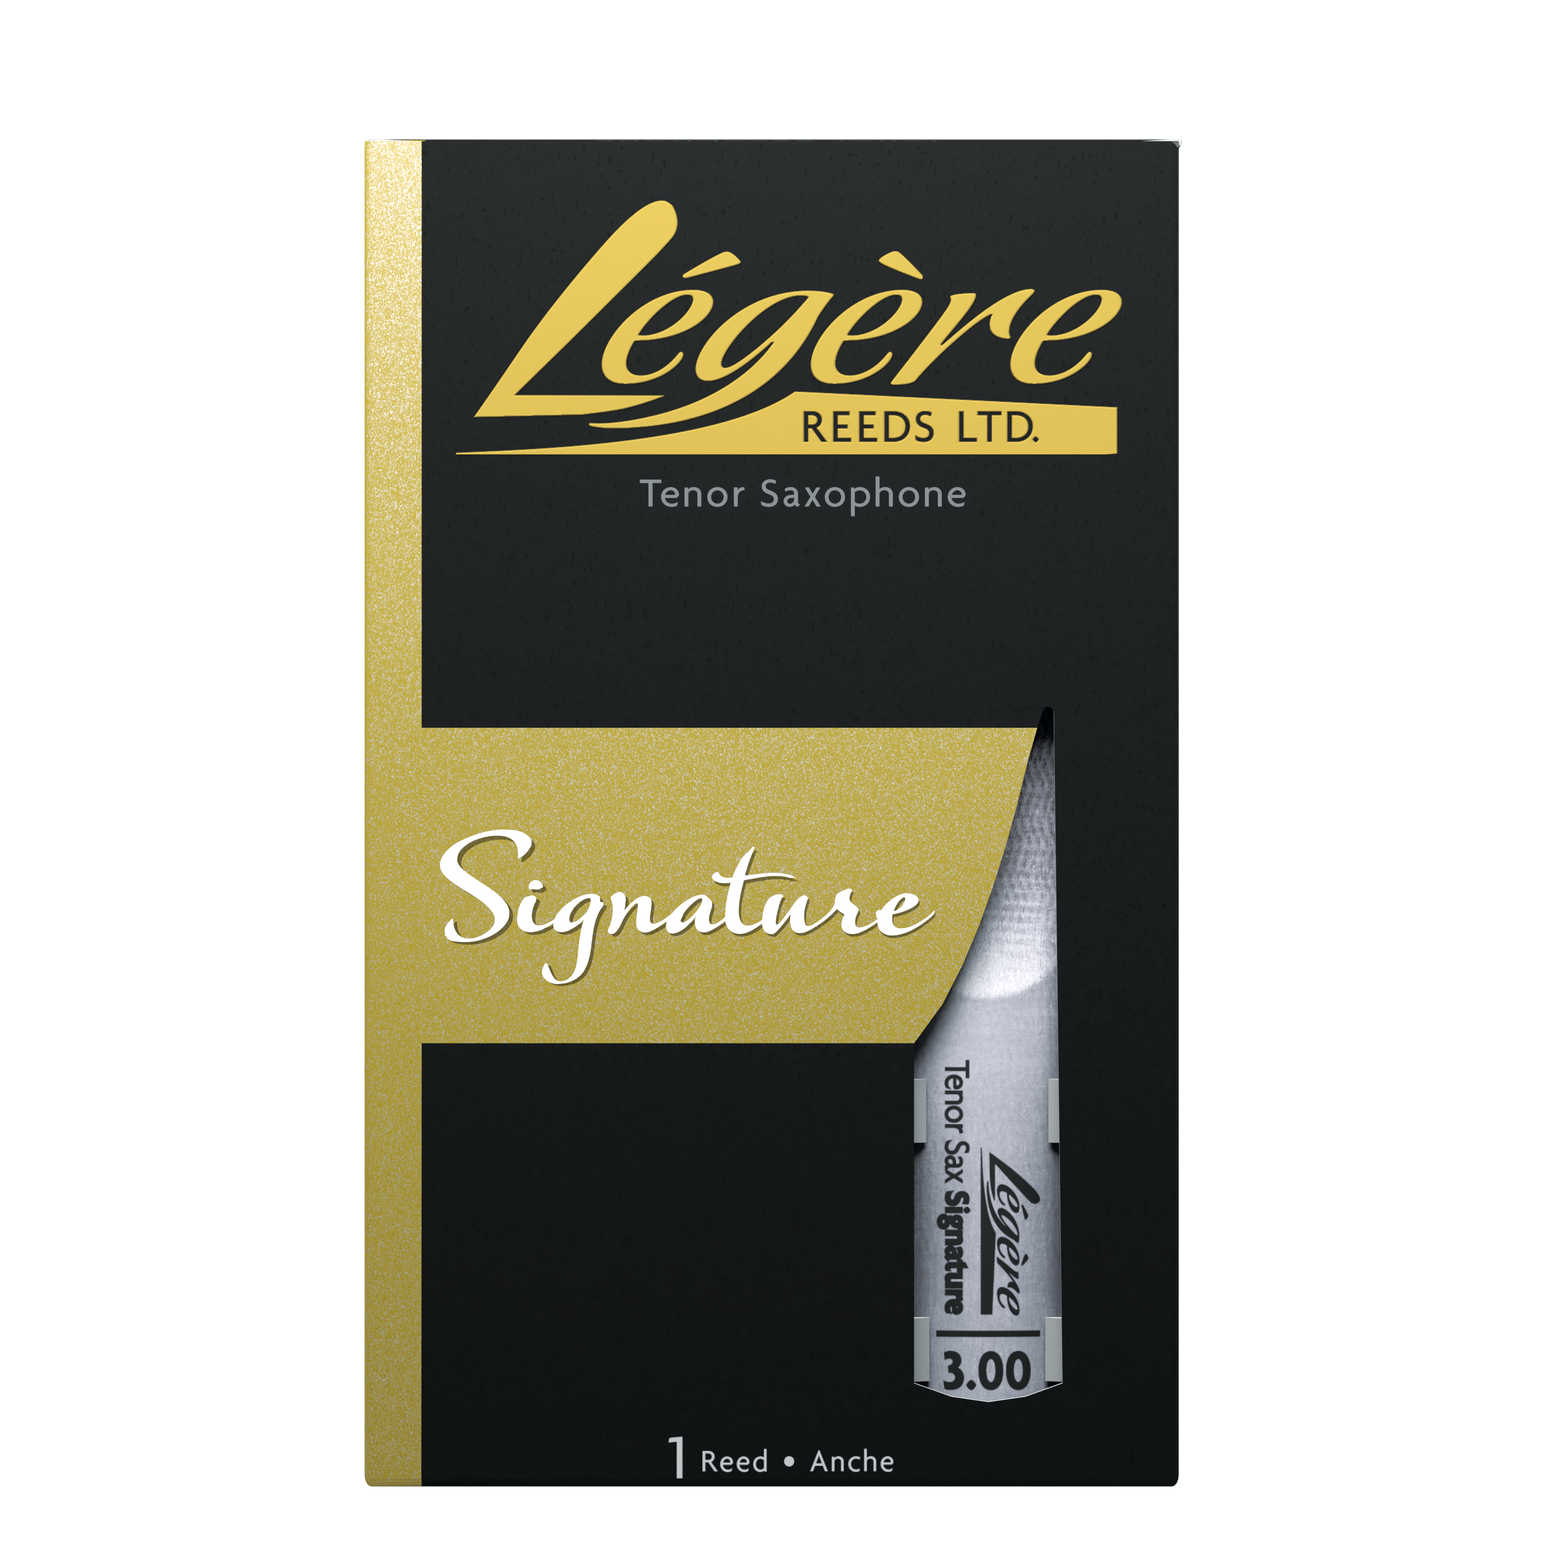 Legere Tenor Saxophone Reed (Assorted Strengths)